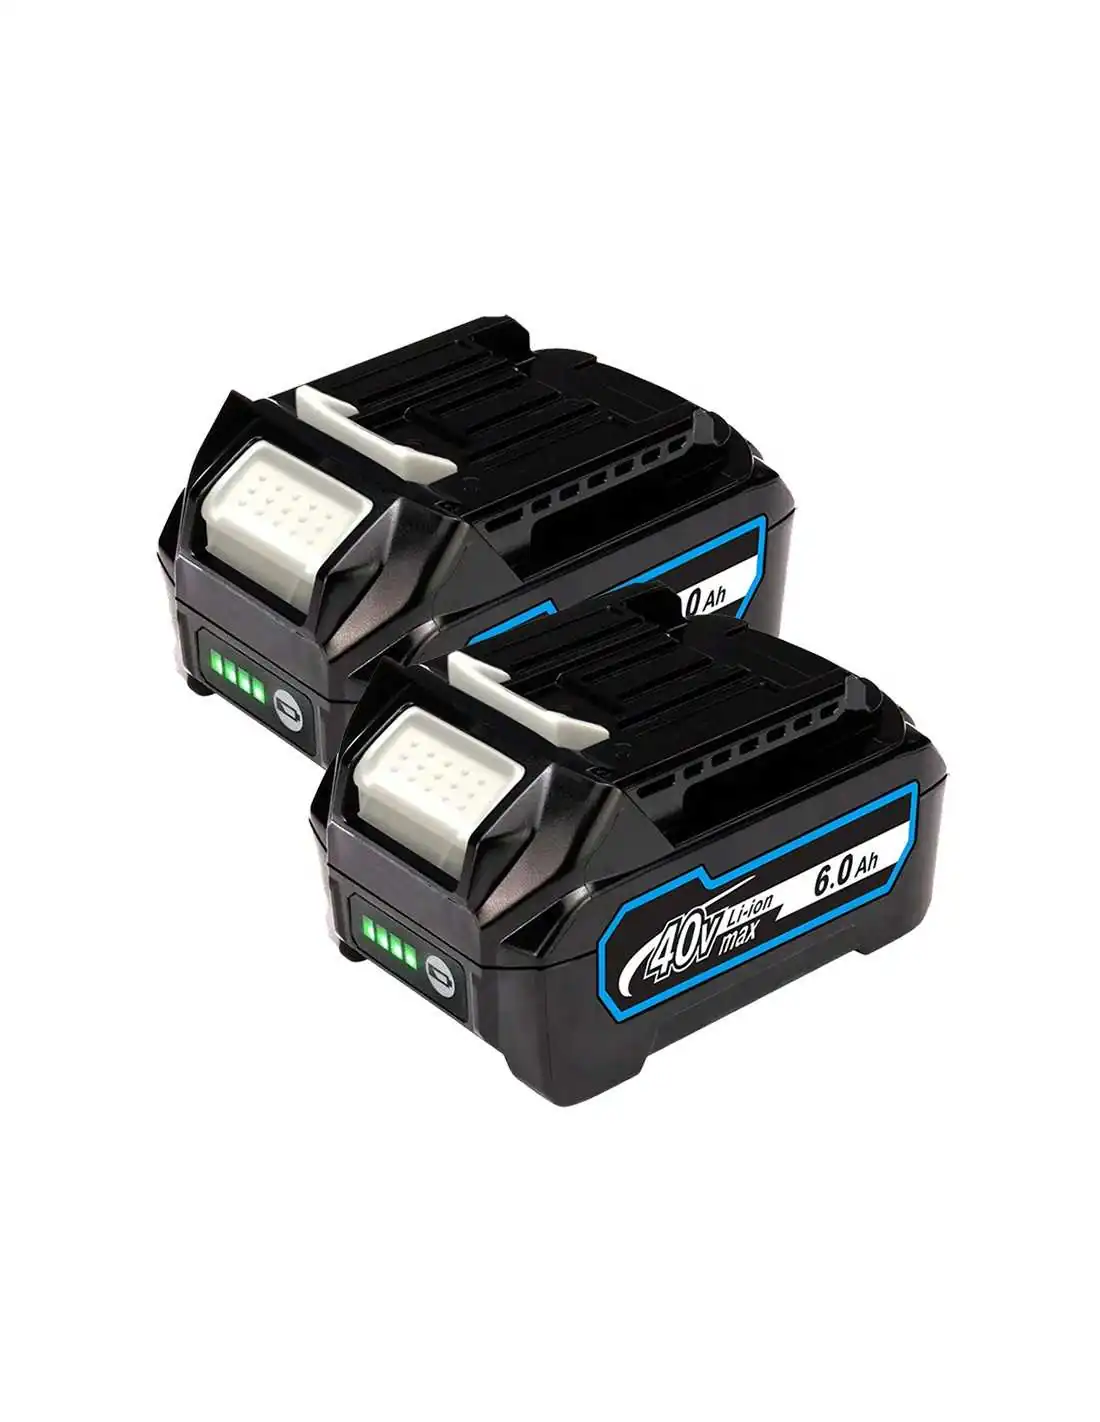 For Makita 6.0Ah 40V Max XGT BL4025 BL4040 Lithium-Ion Battery Replacement (Twin Pack)